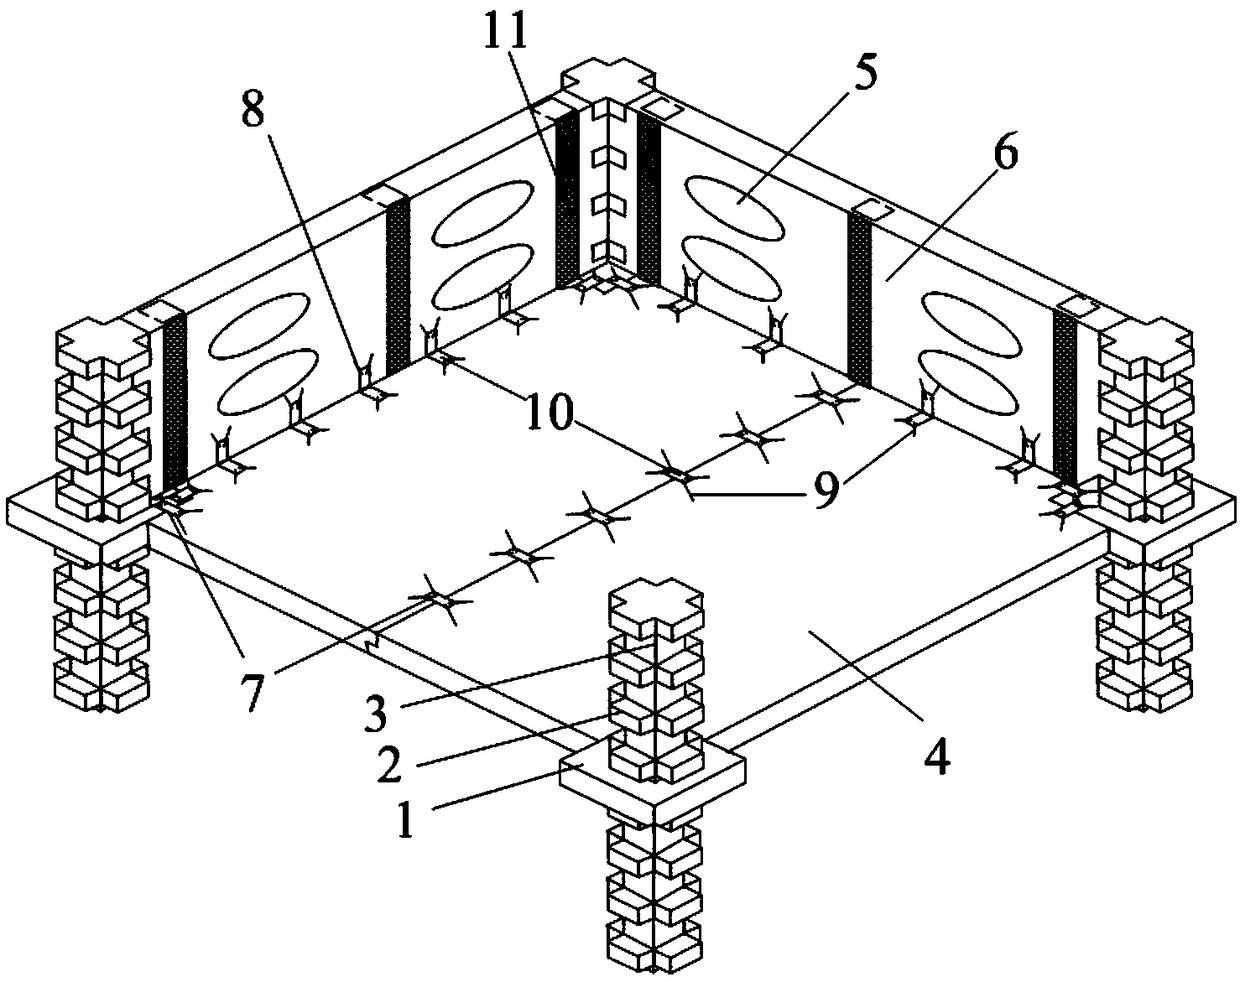 Full-dry-type prefabricated concrete slab column structure system